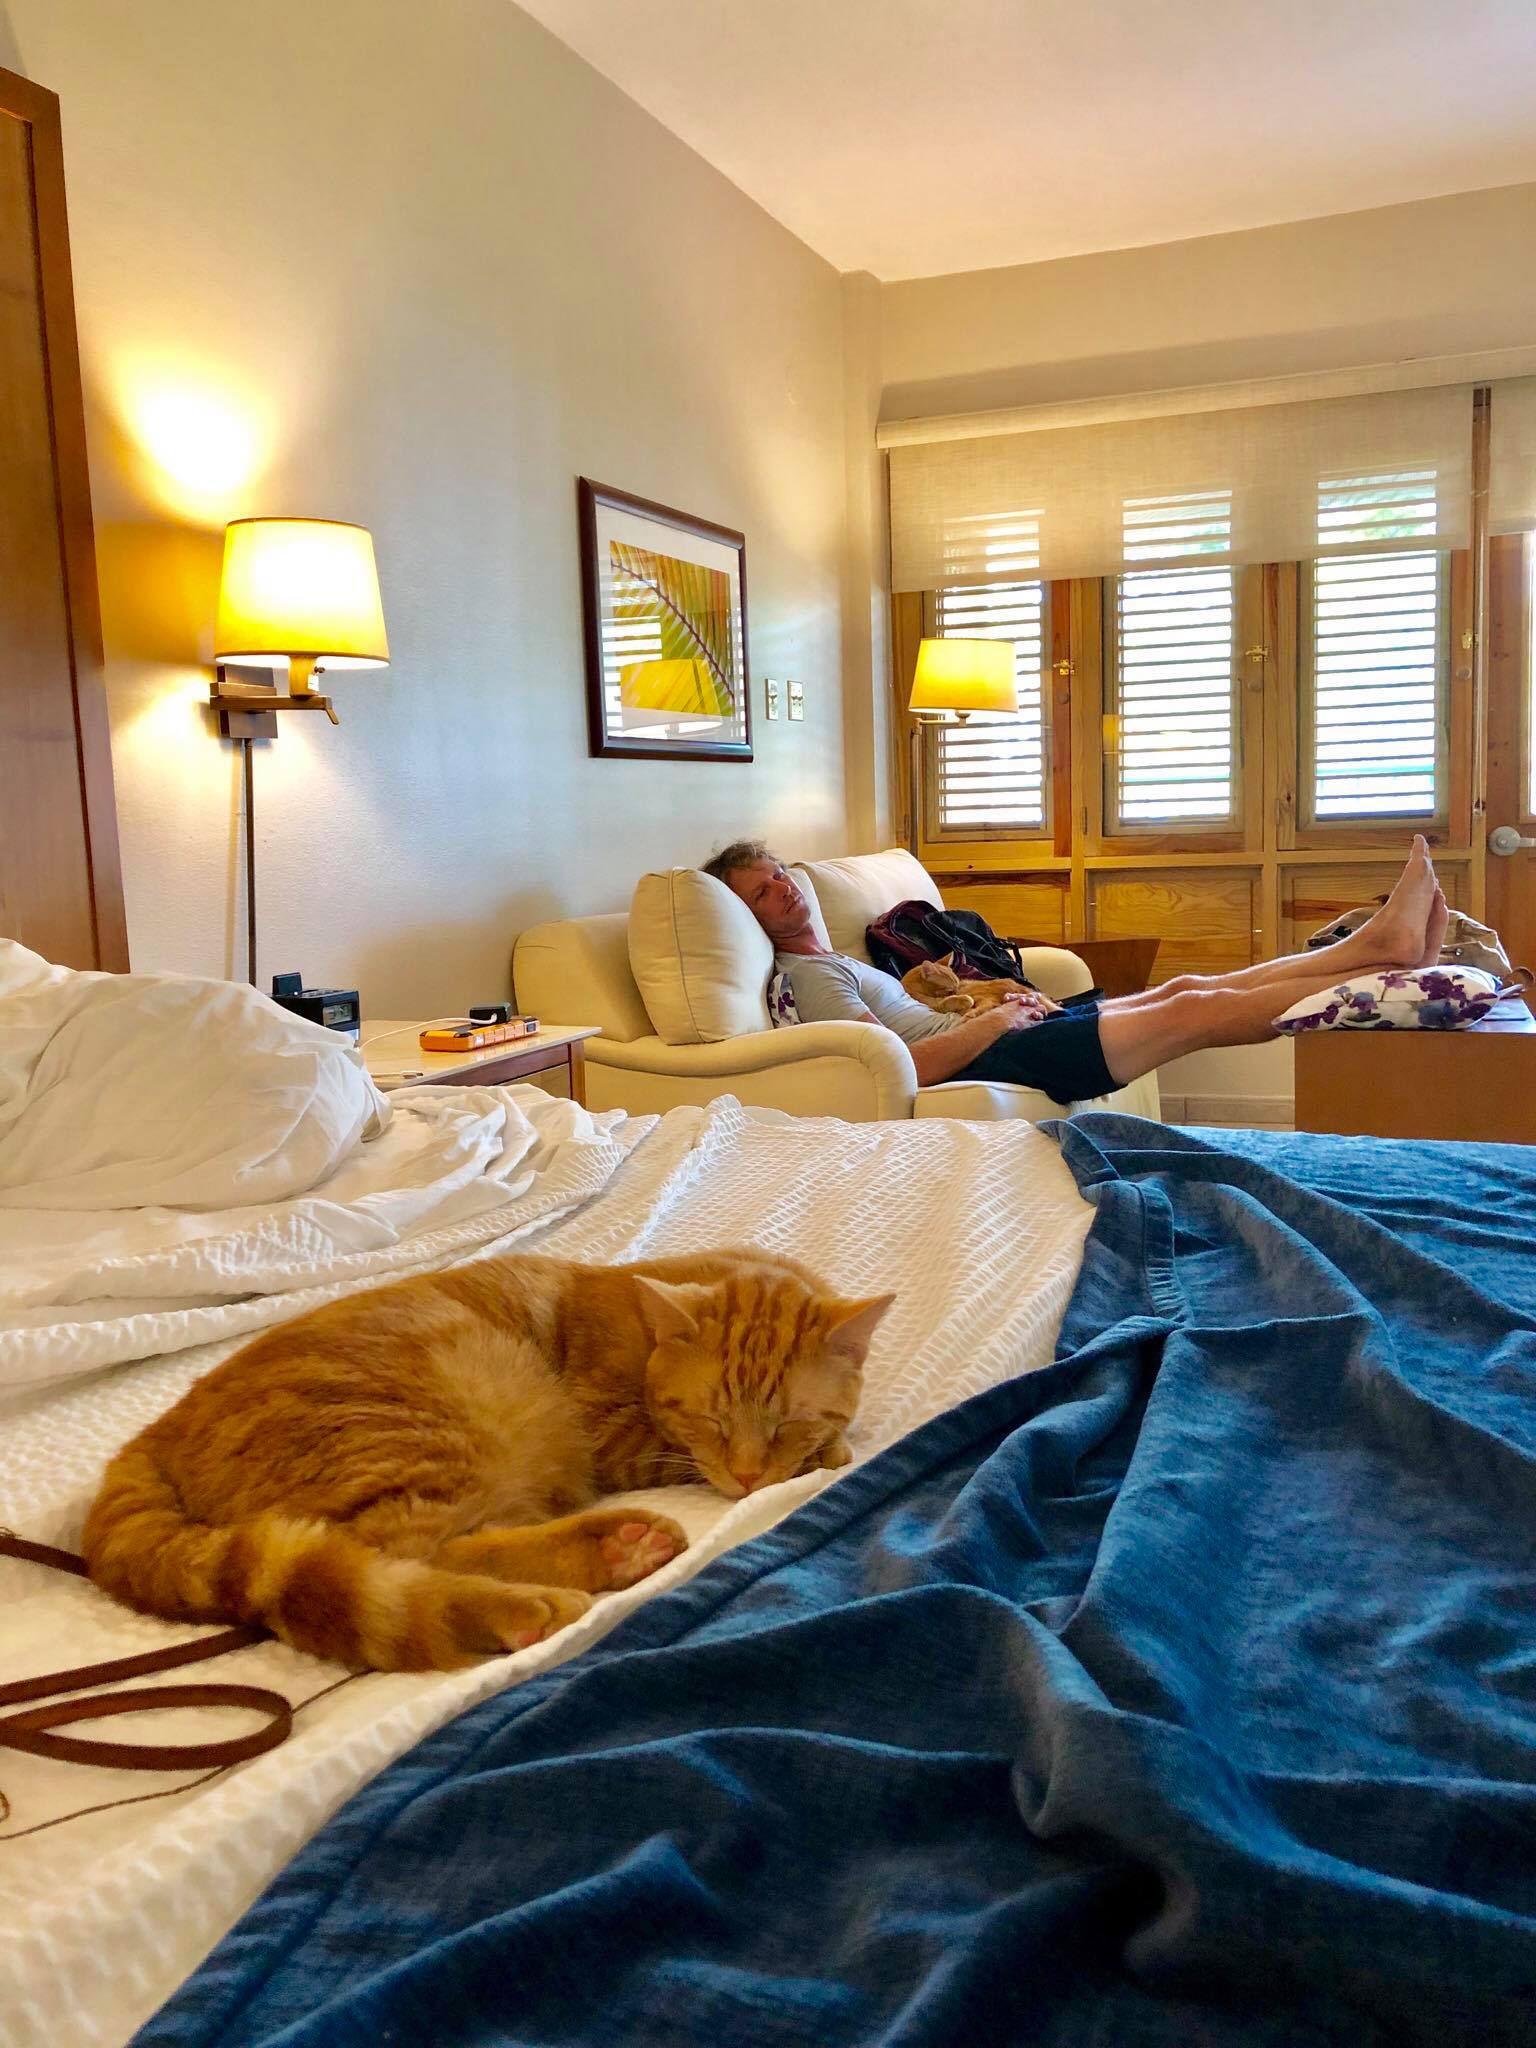 Sailing Life Day 322 Hotel Life of The Sailors Cats - Captain Ahab & Little Zissou's Luxury Staycation1.jpg